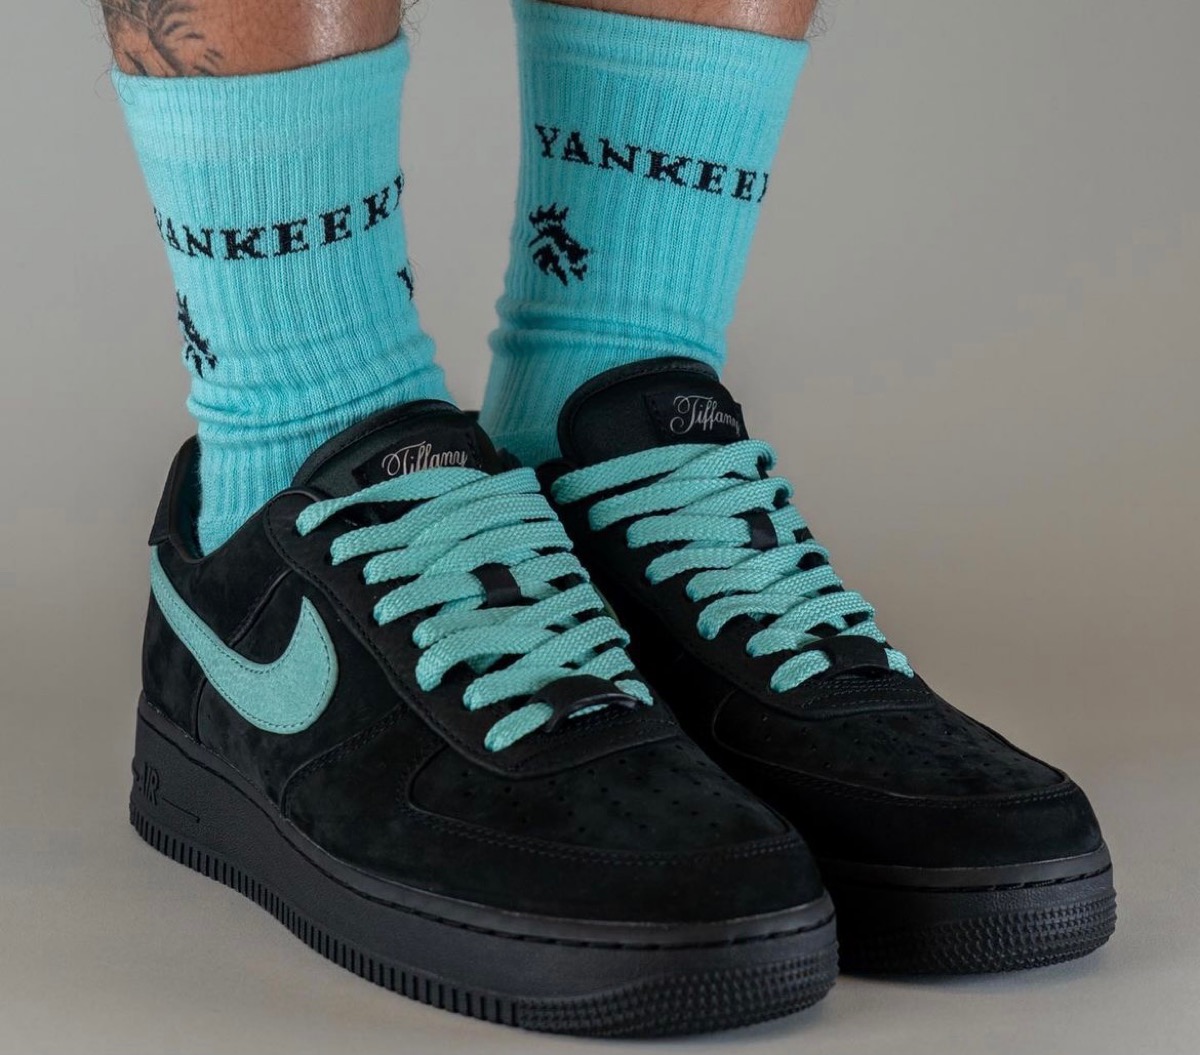 Tiffany & Co. × Nike Air Force 1 Low “1837”が国内3月7日に